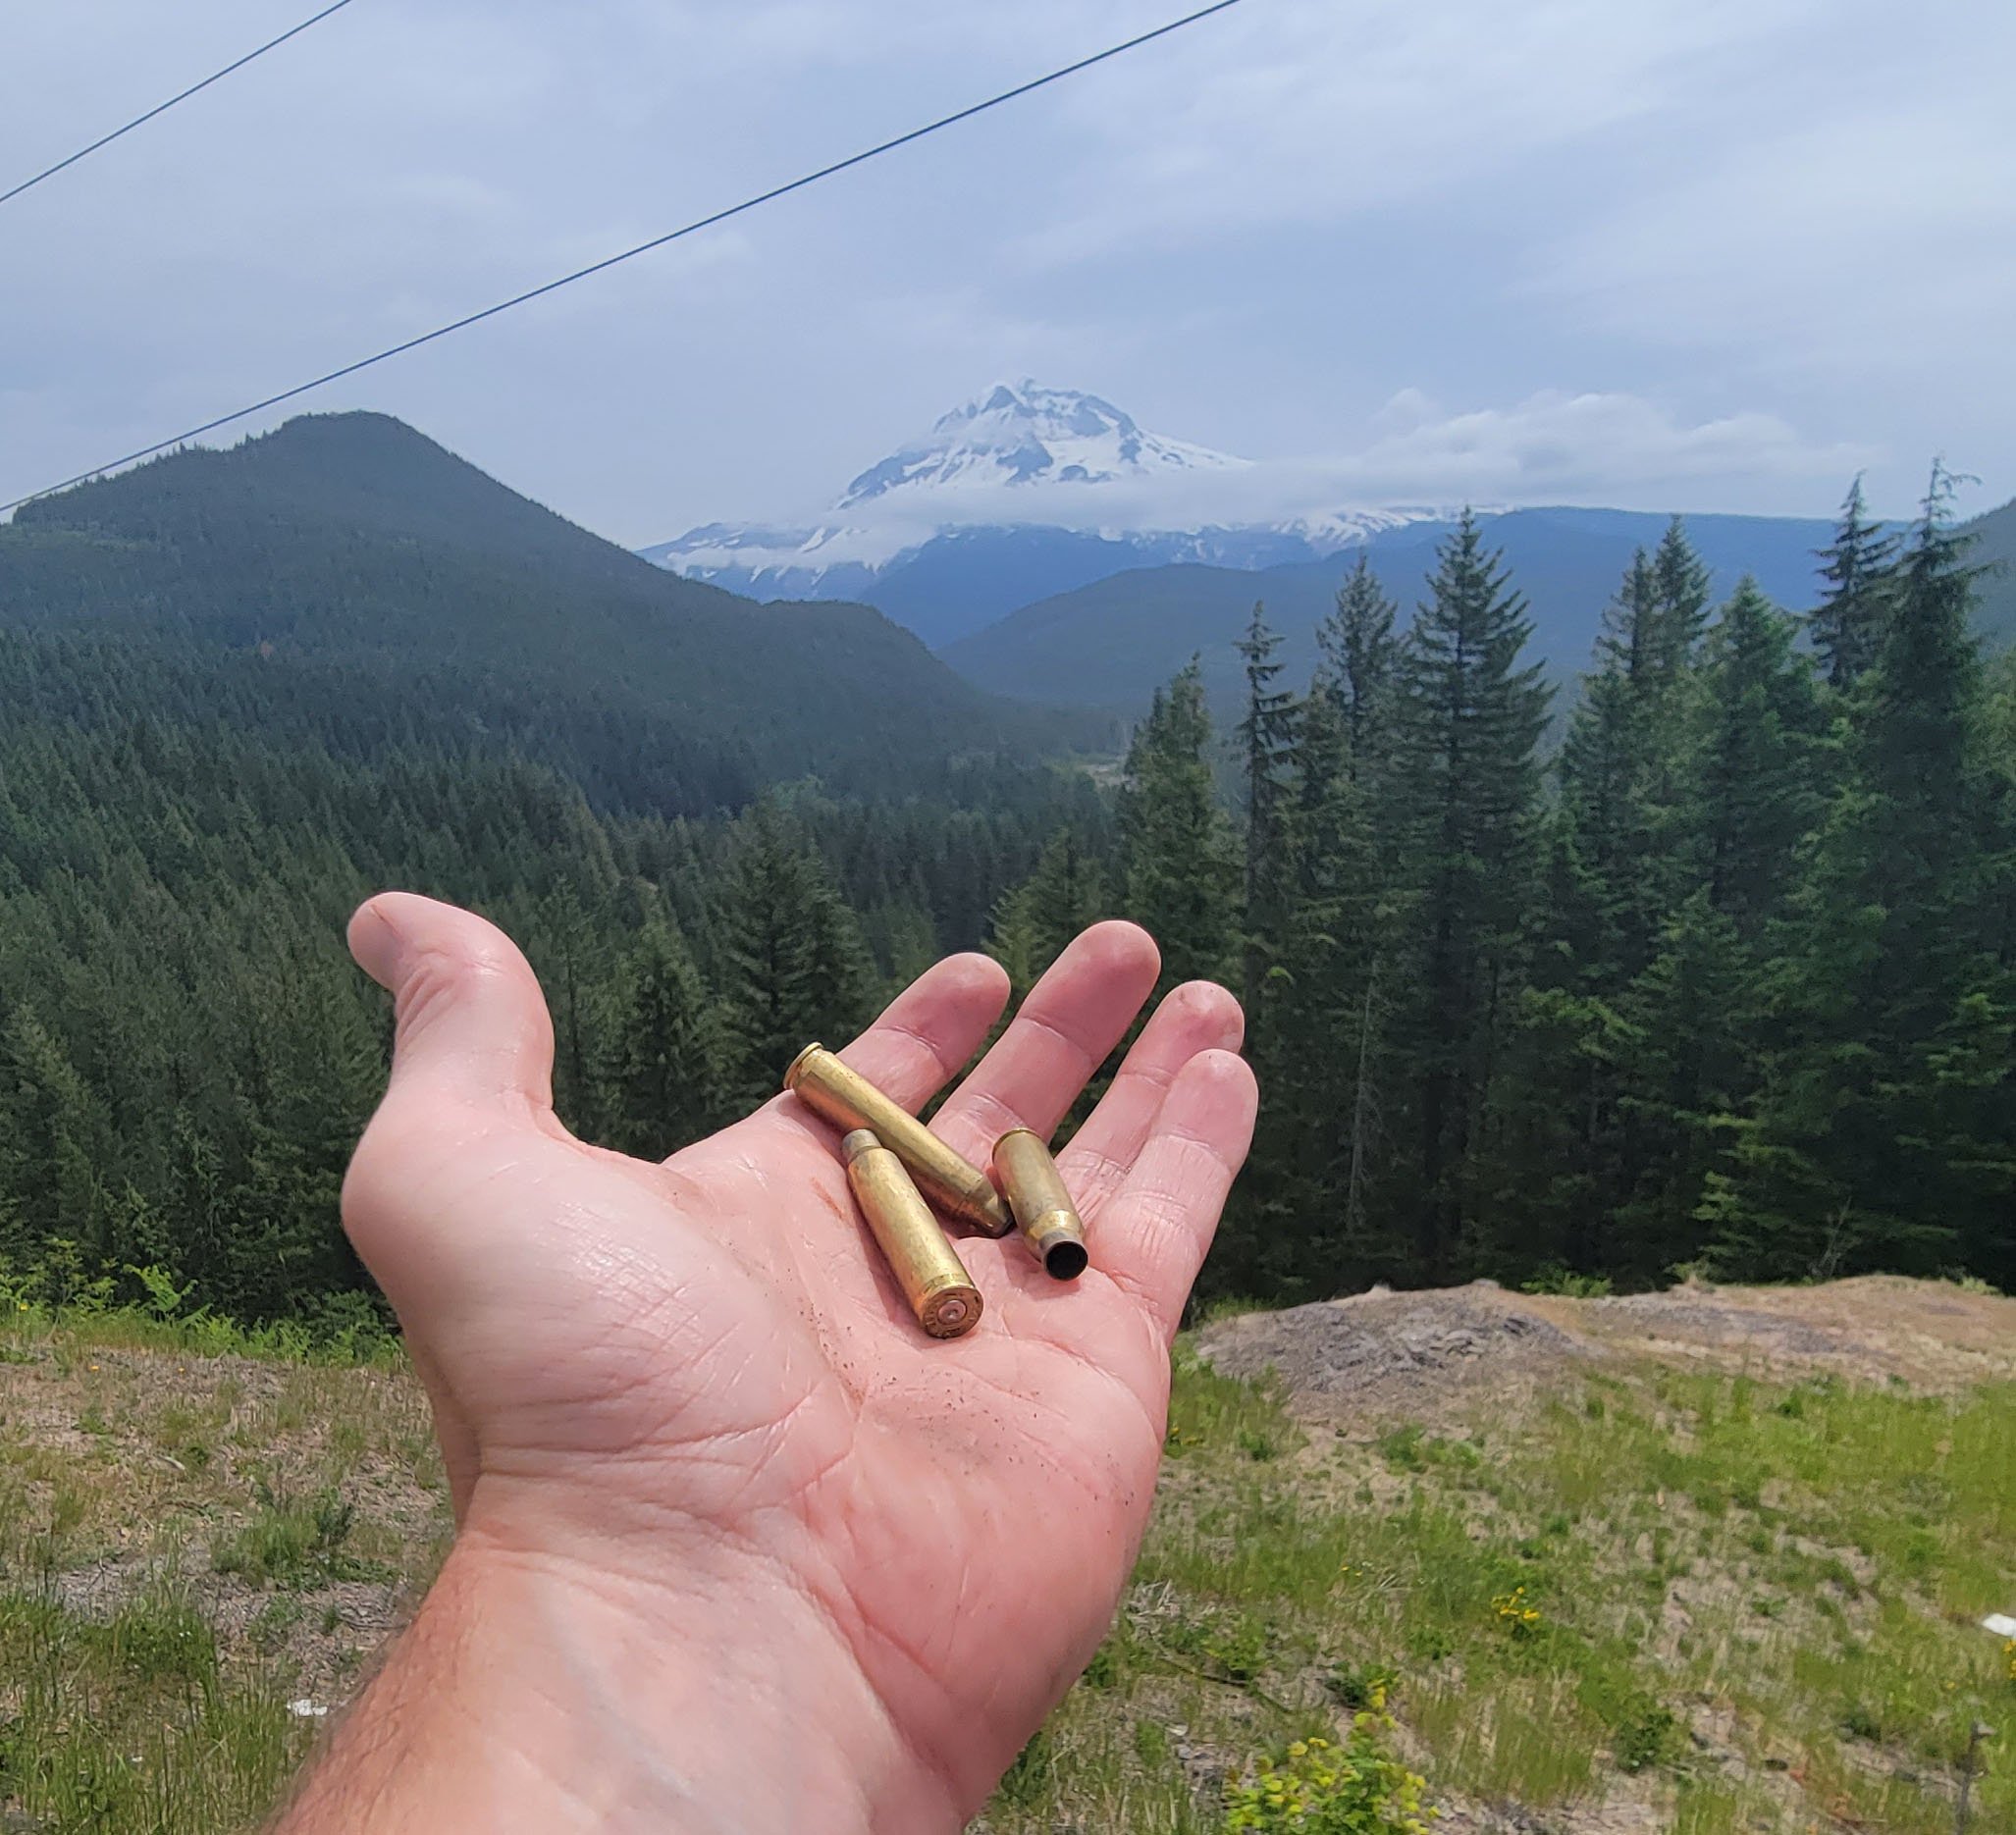  Up the first pass around Mt. Hood. Found some ‘Murica remains that the local yokels/dipshits left there. I’m not a big environmental person but at least I don’t trash nature on purpose. 